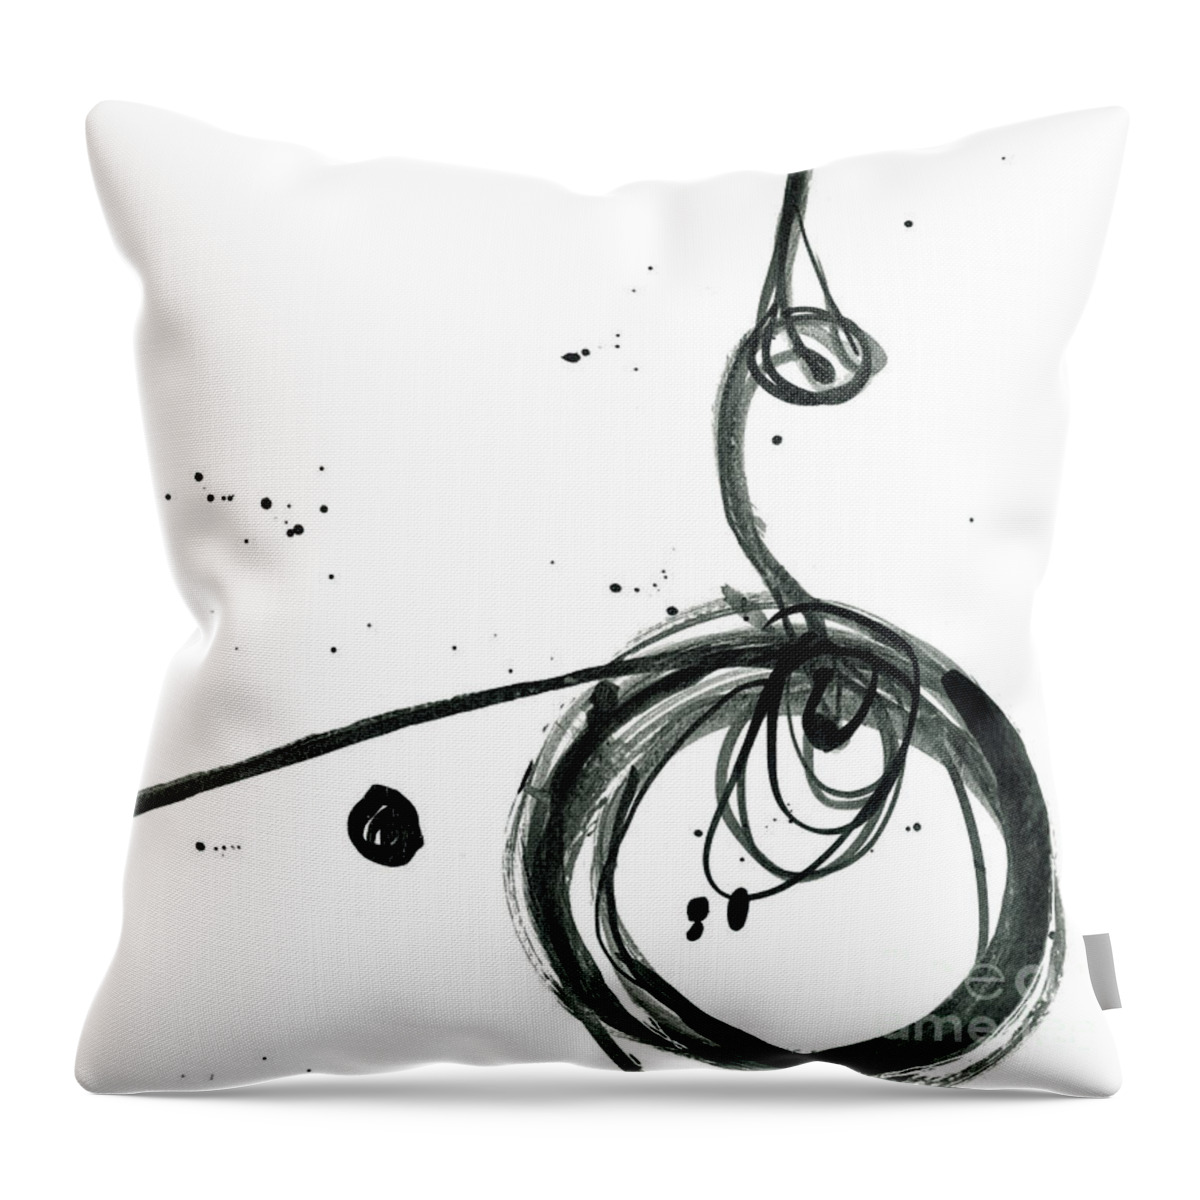 Inward - Revolving Life Collection - Modern Ink Artwork Throw Pillow featuring the painting Revolving Life Collection - Modern Abstract Black Ink Artwork by Patricia Awapara